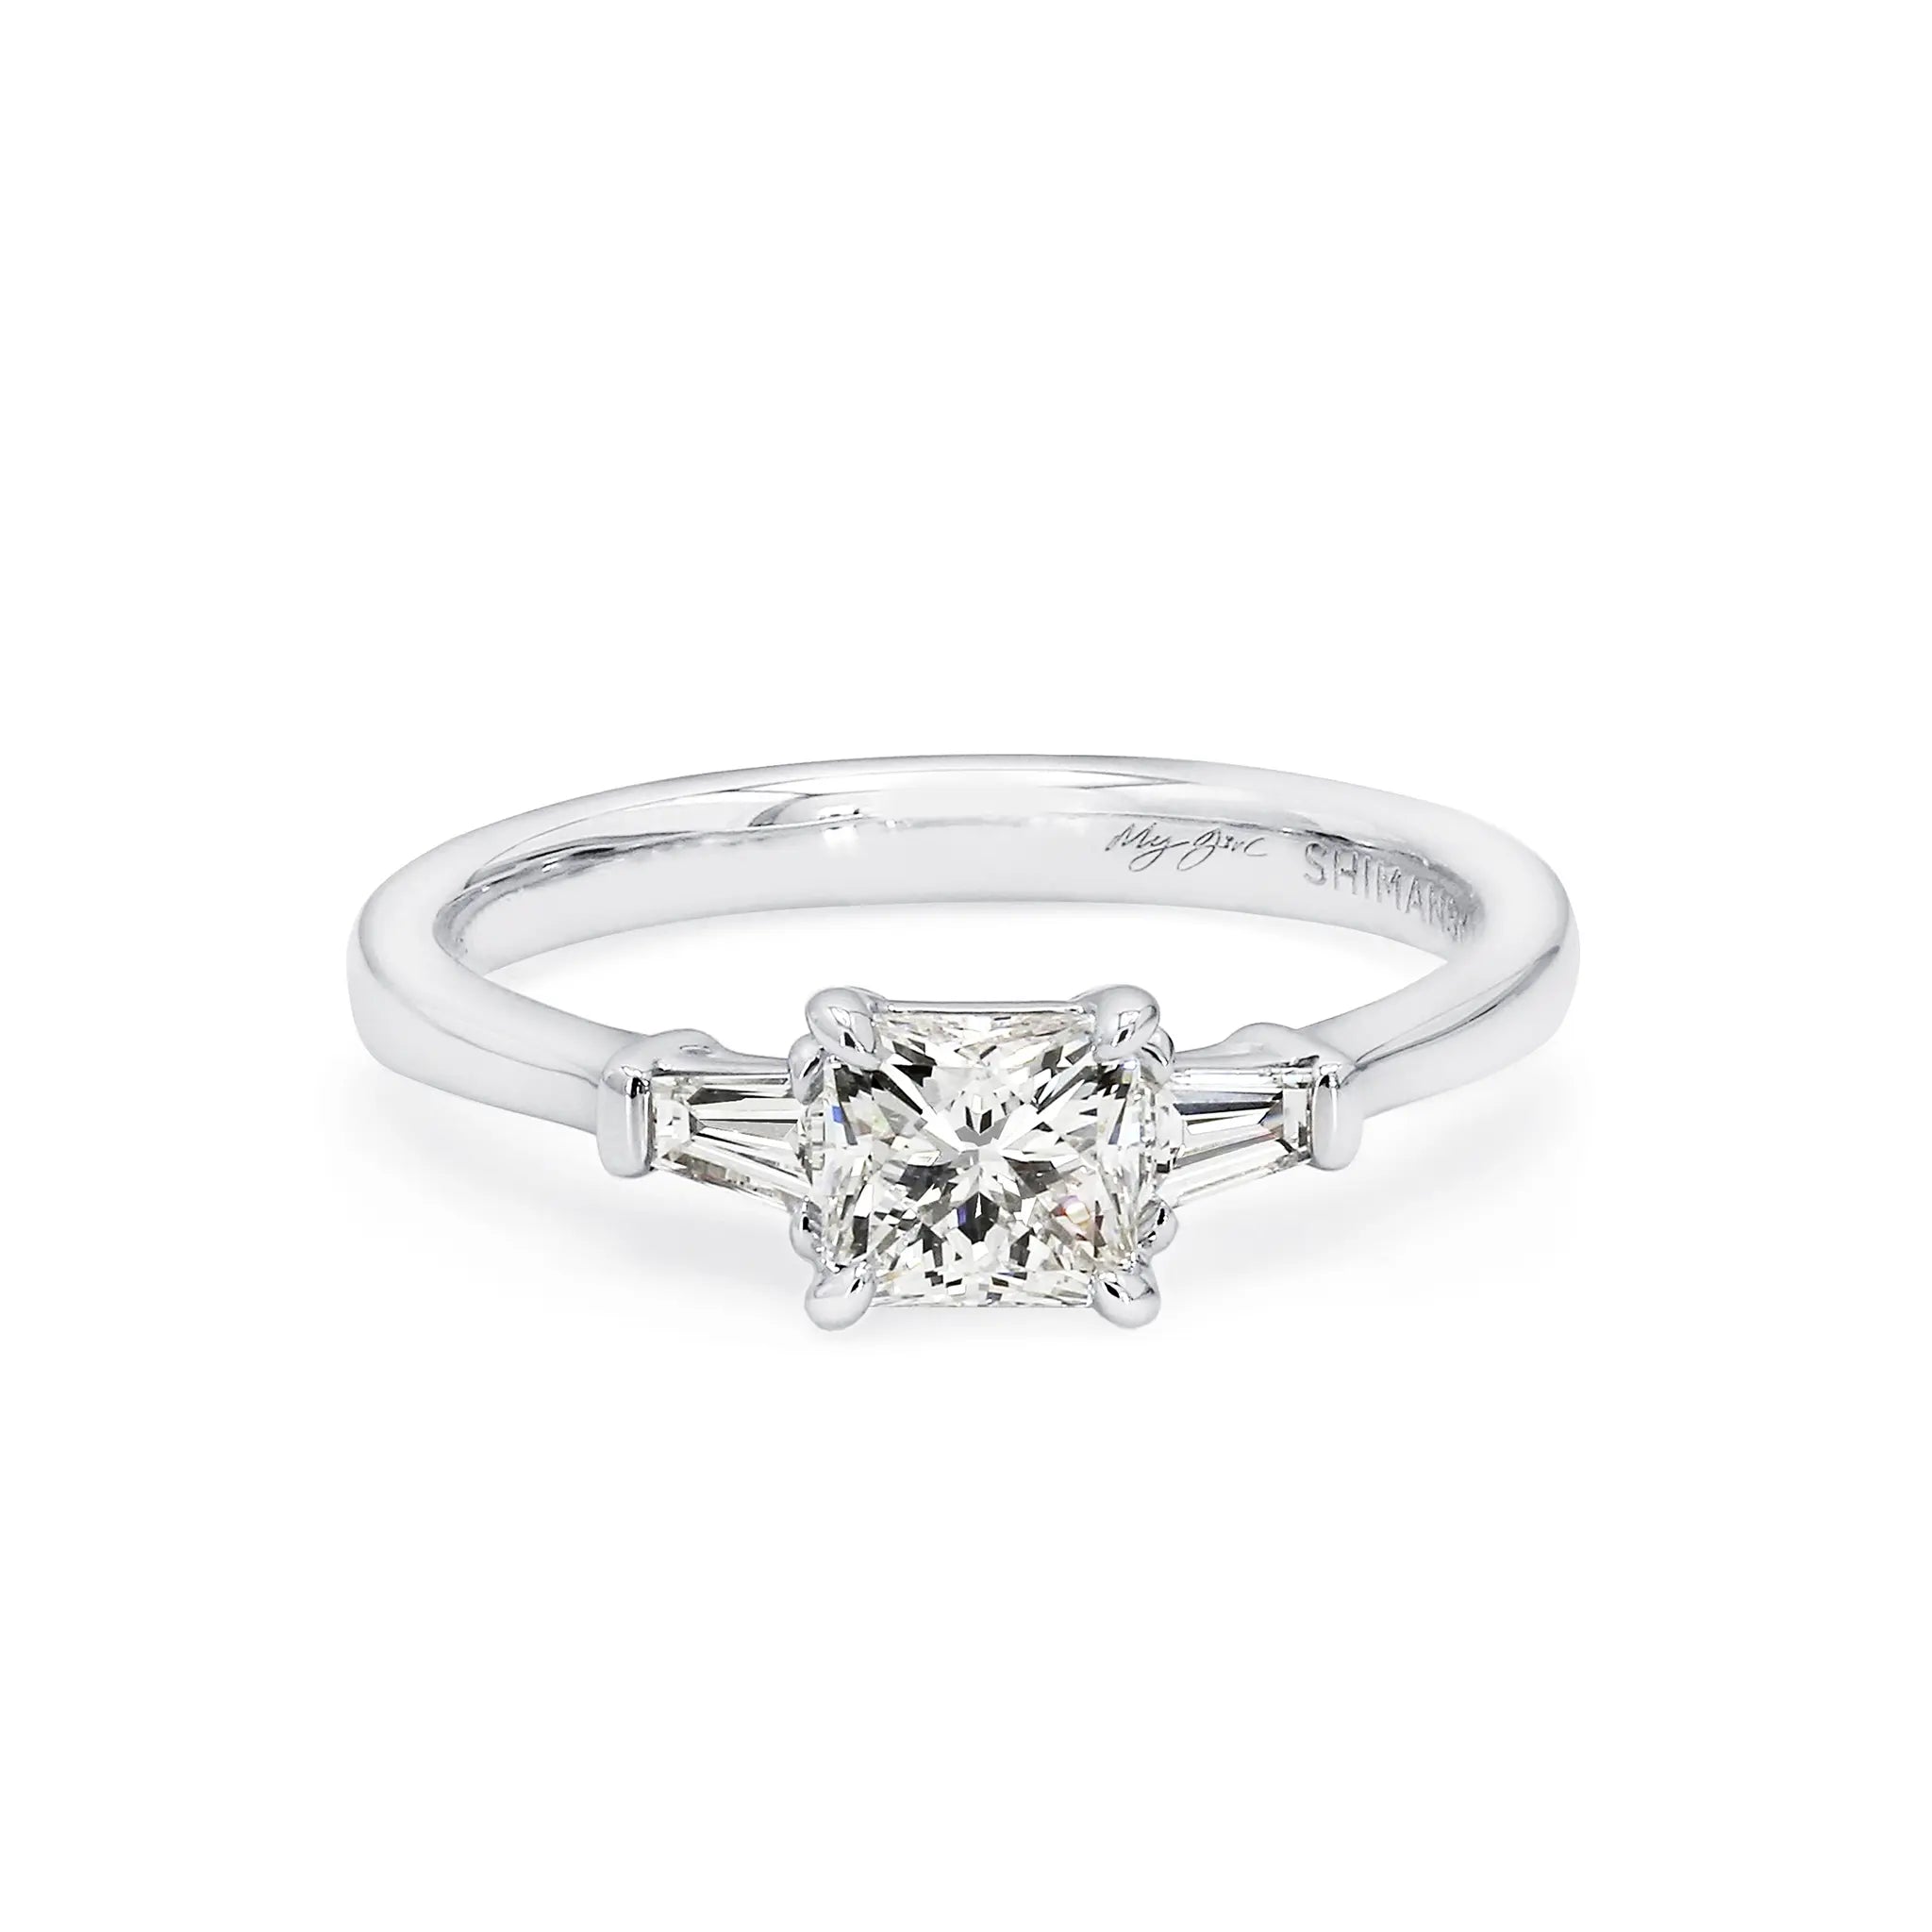 Shimansky - My Girl Dahlia Diamond Engagement Ring 0.30ct Crafted in 18K White Gold